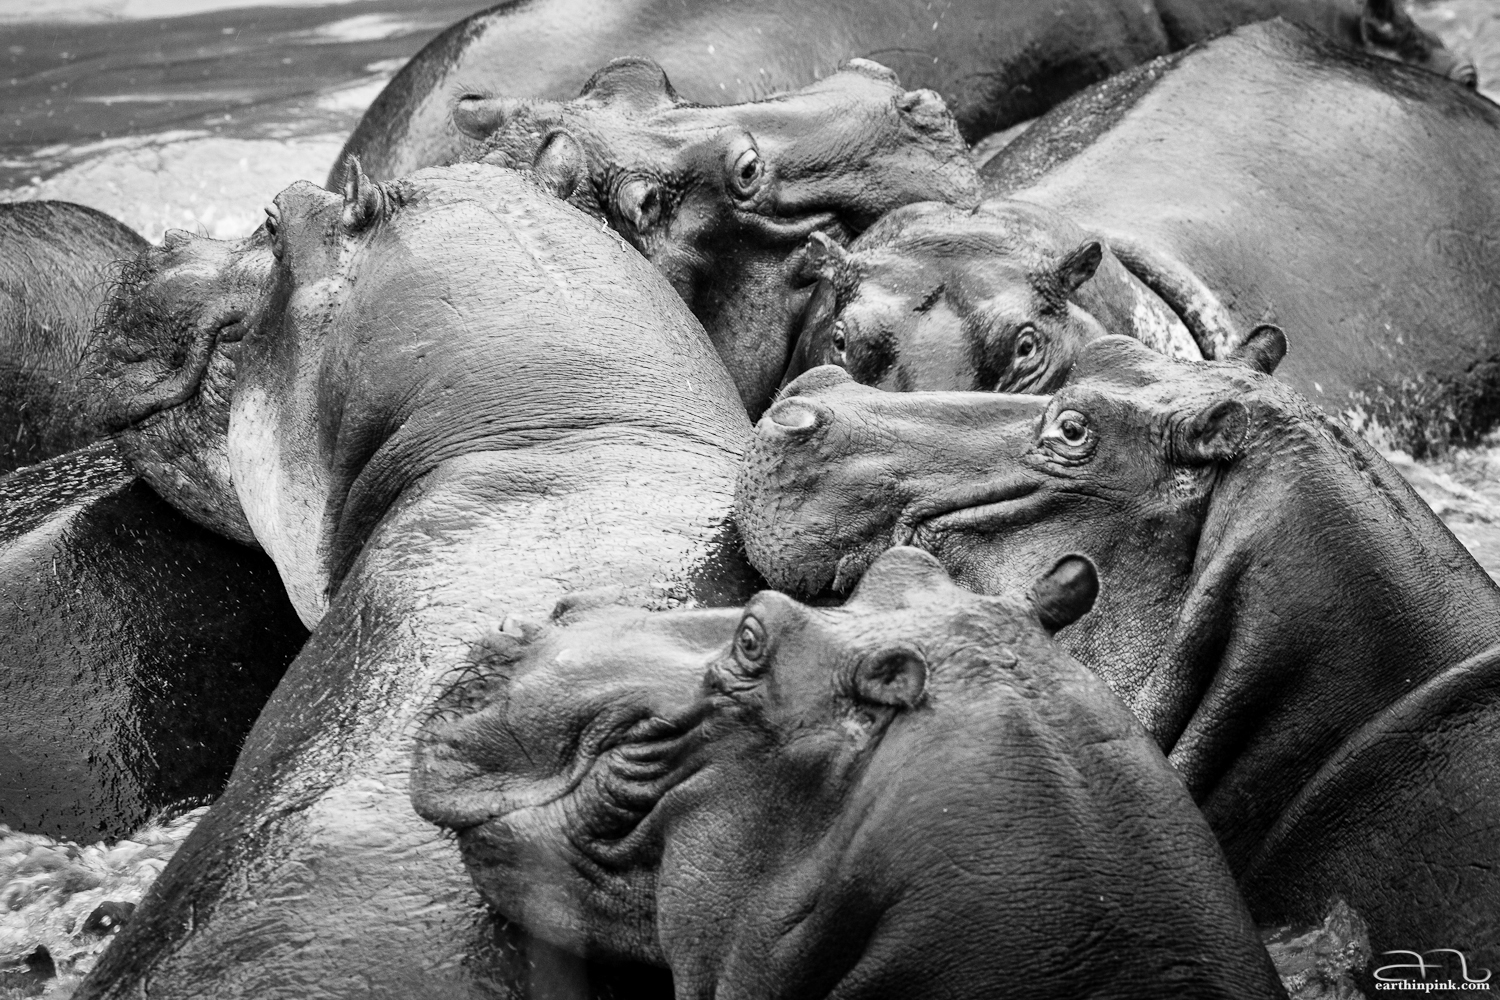 Hippos cuddle close to each other to help preserve body heat.